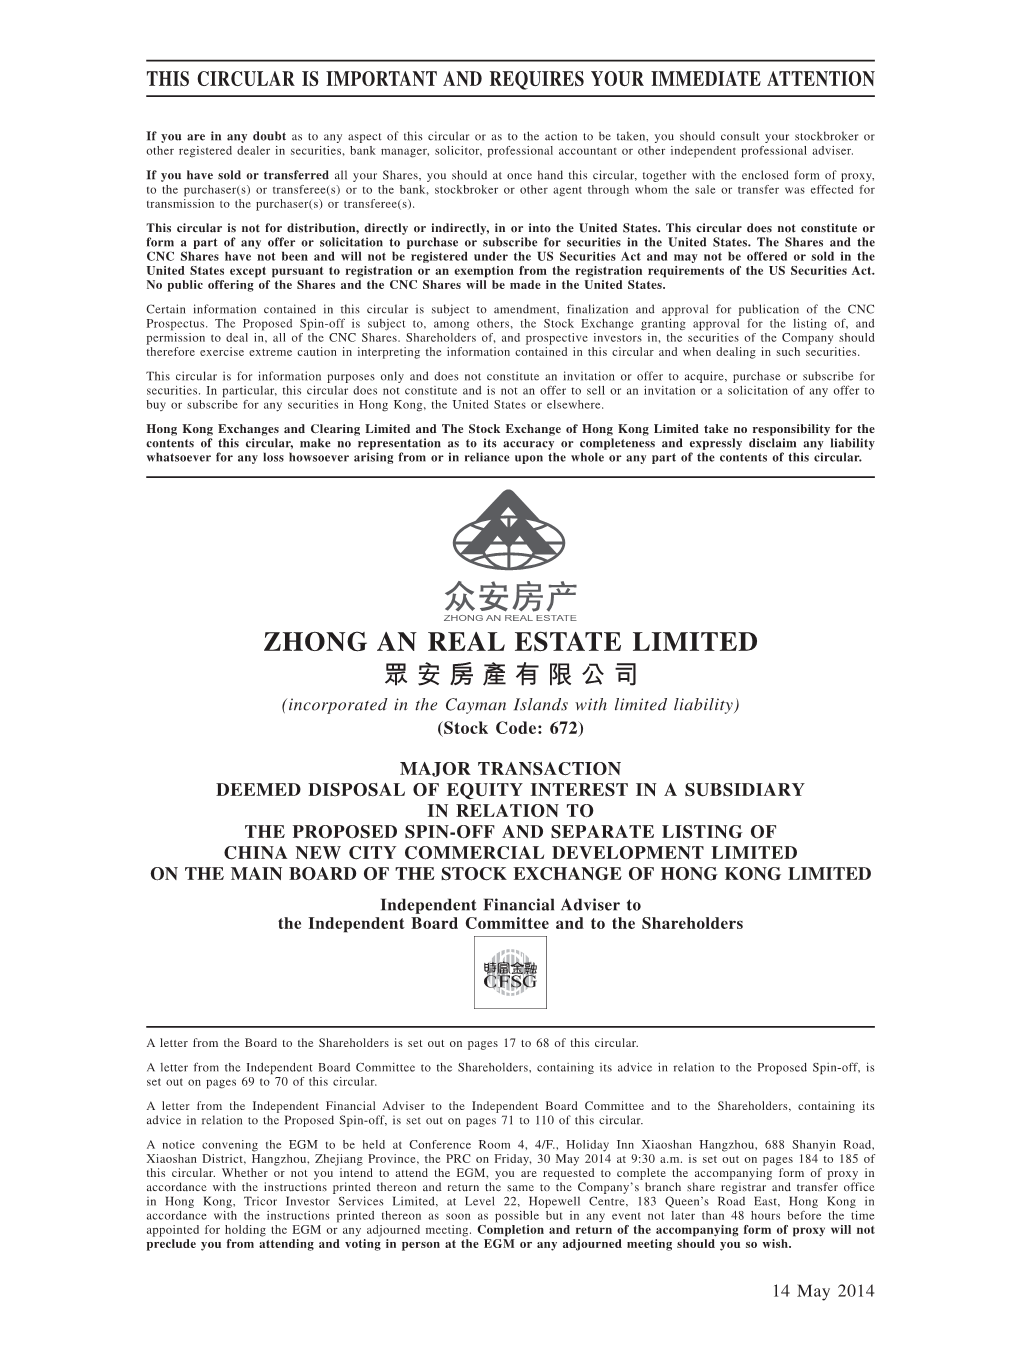 ZHONG an REAL ESTATE LIMITED 眾安房產有限公司 (Incorporated in the Cayman Islands with Limited Liability) (Stock Code: 672)